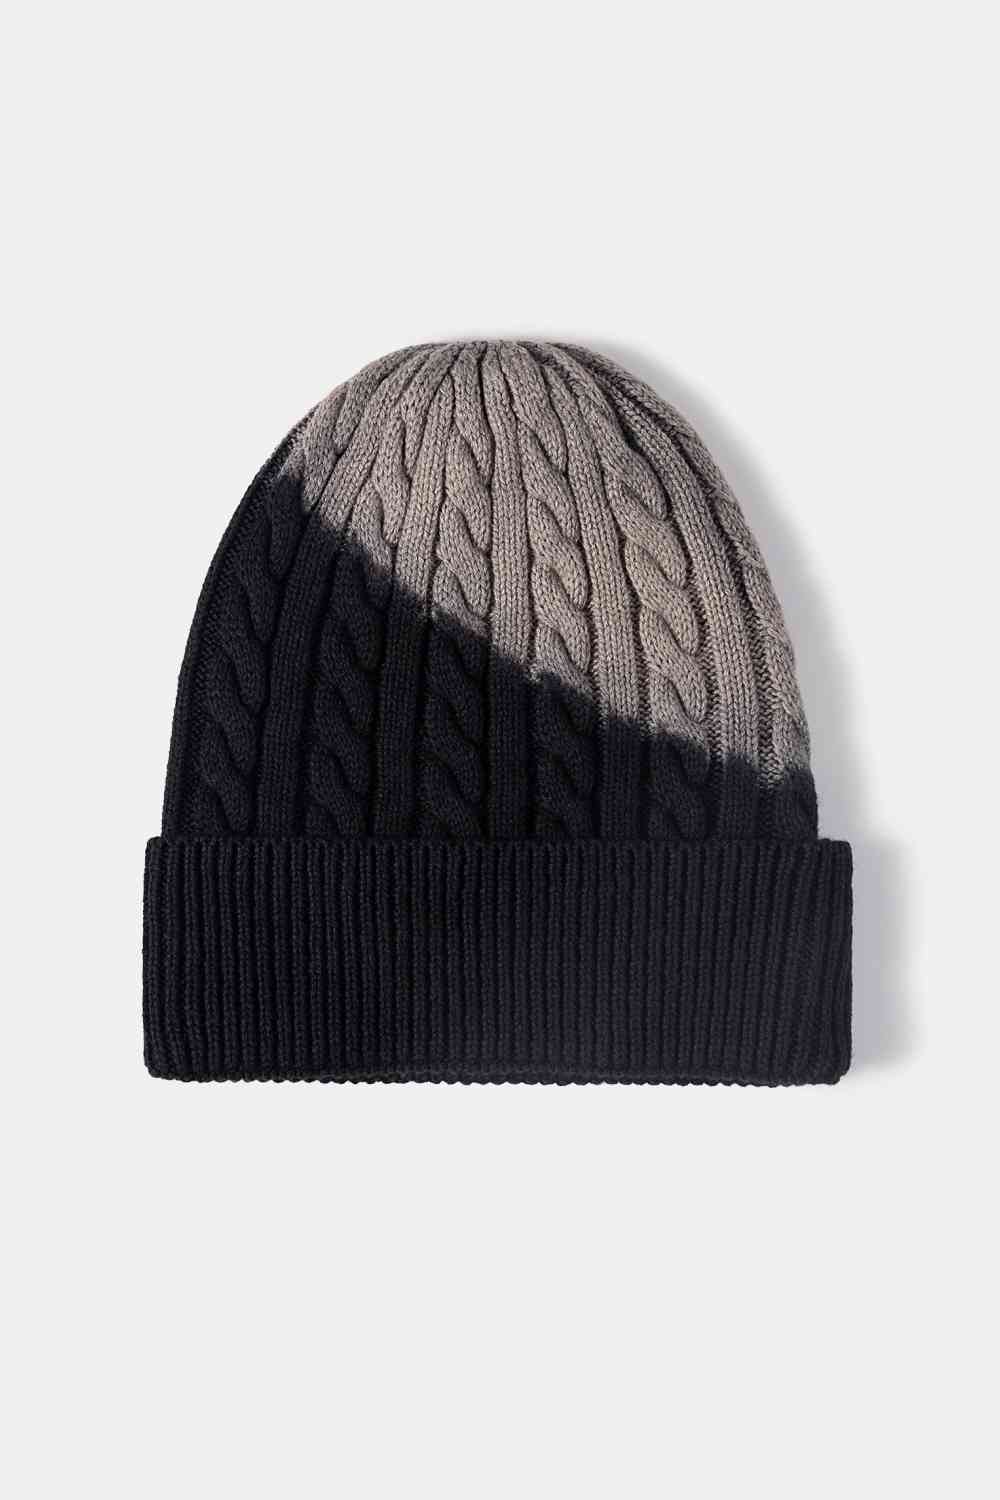 Contrast Tie-Dye Cable-Knit Cuffed Beanie - Black/Gray / One Size Wynter 4 All Seasons